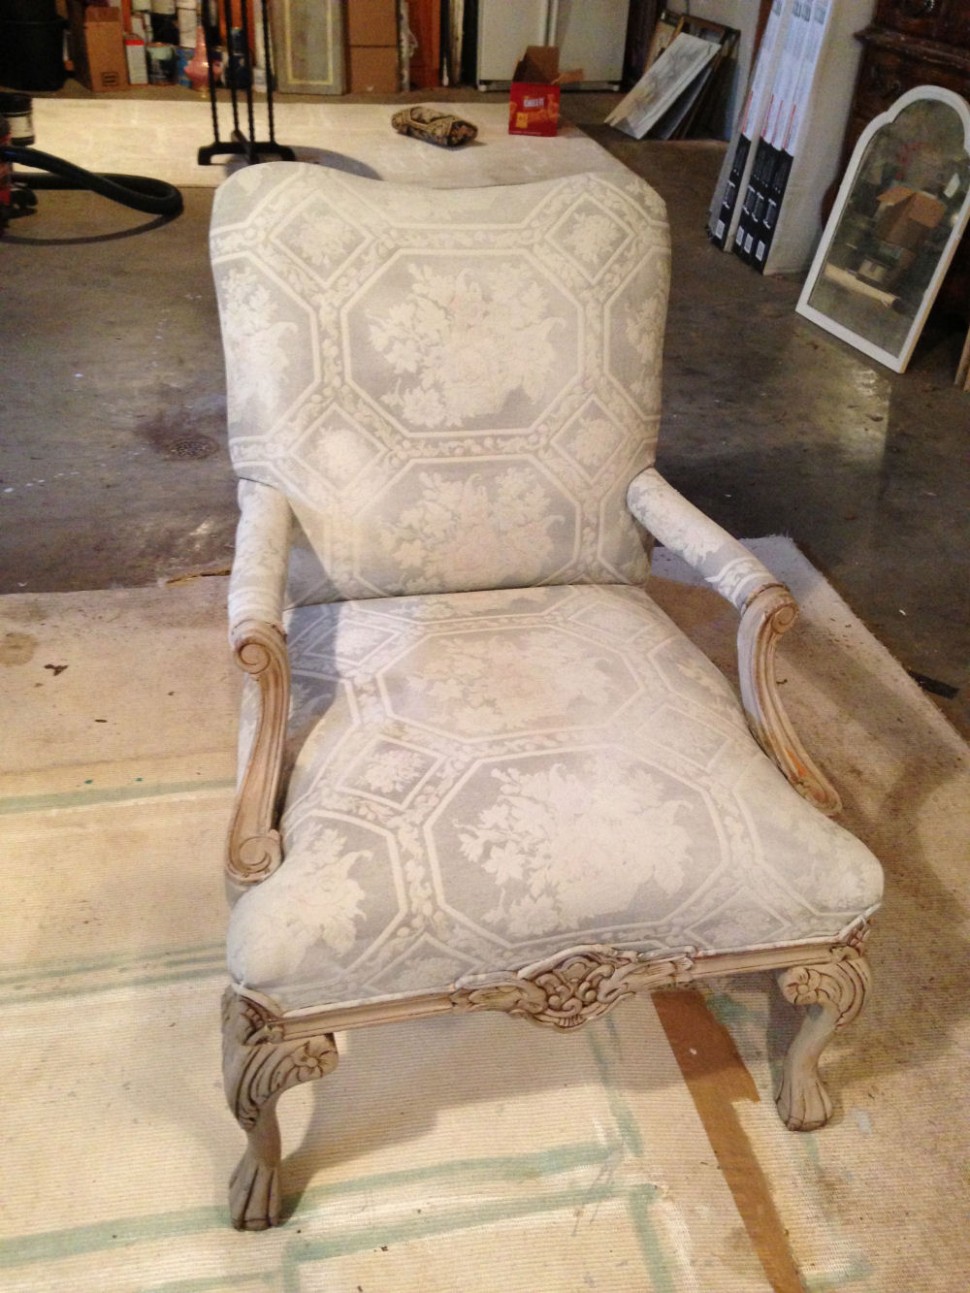 Painting Fabric With Annie Sloan Chalk Paint Where To Buy Annie Sloan Chalk Paint Ottawa